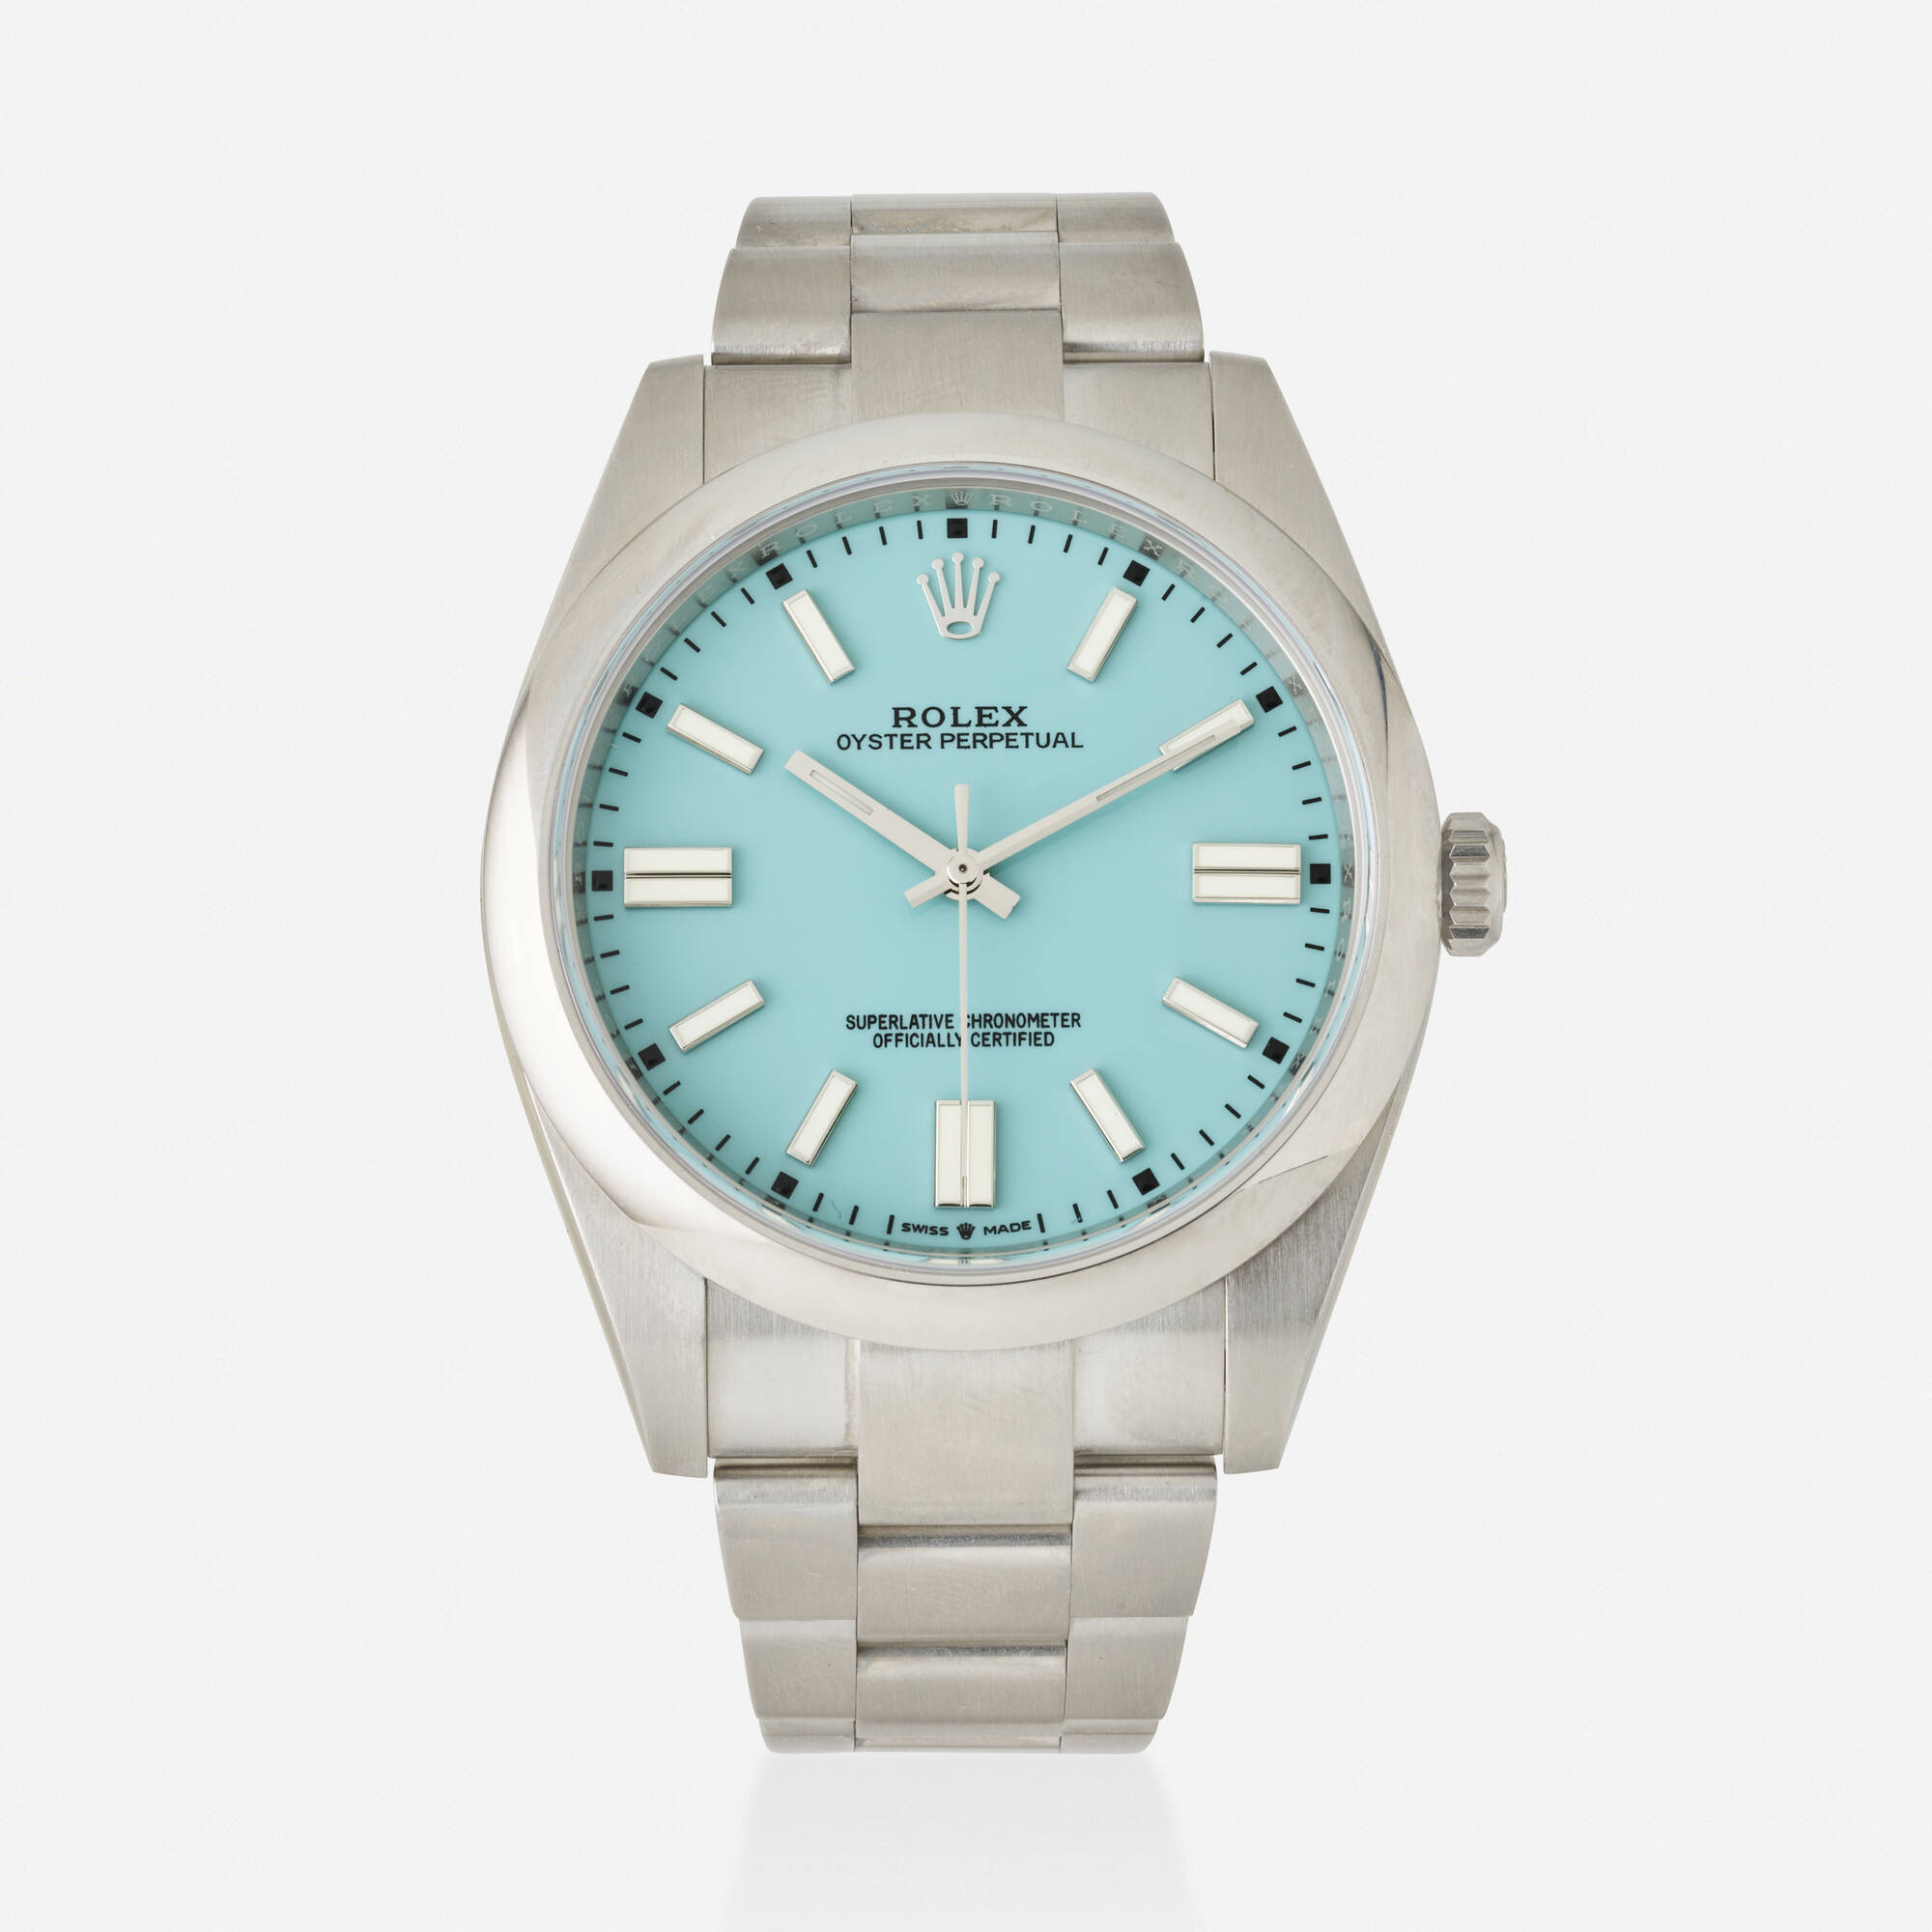 Rolex Oyster Perpetual 41 Stainless Steel - Turquoise Dial - Oyster Bracelet (Ref#124300)